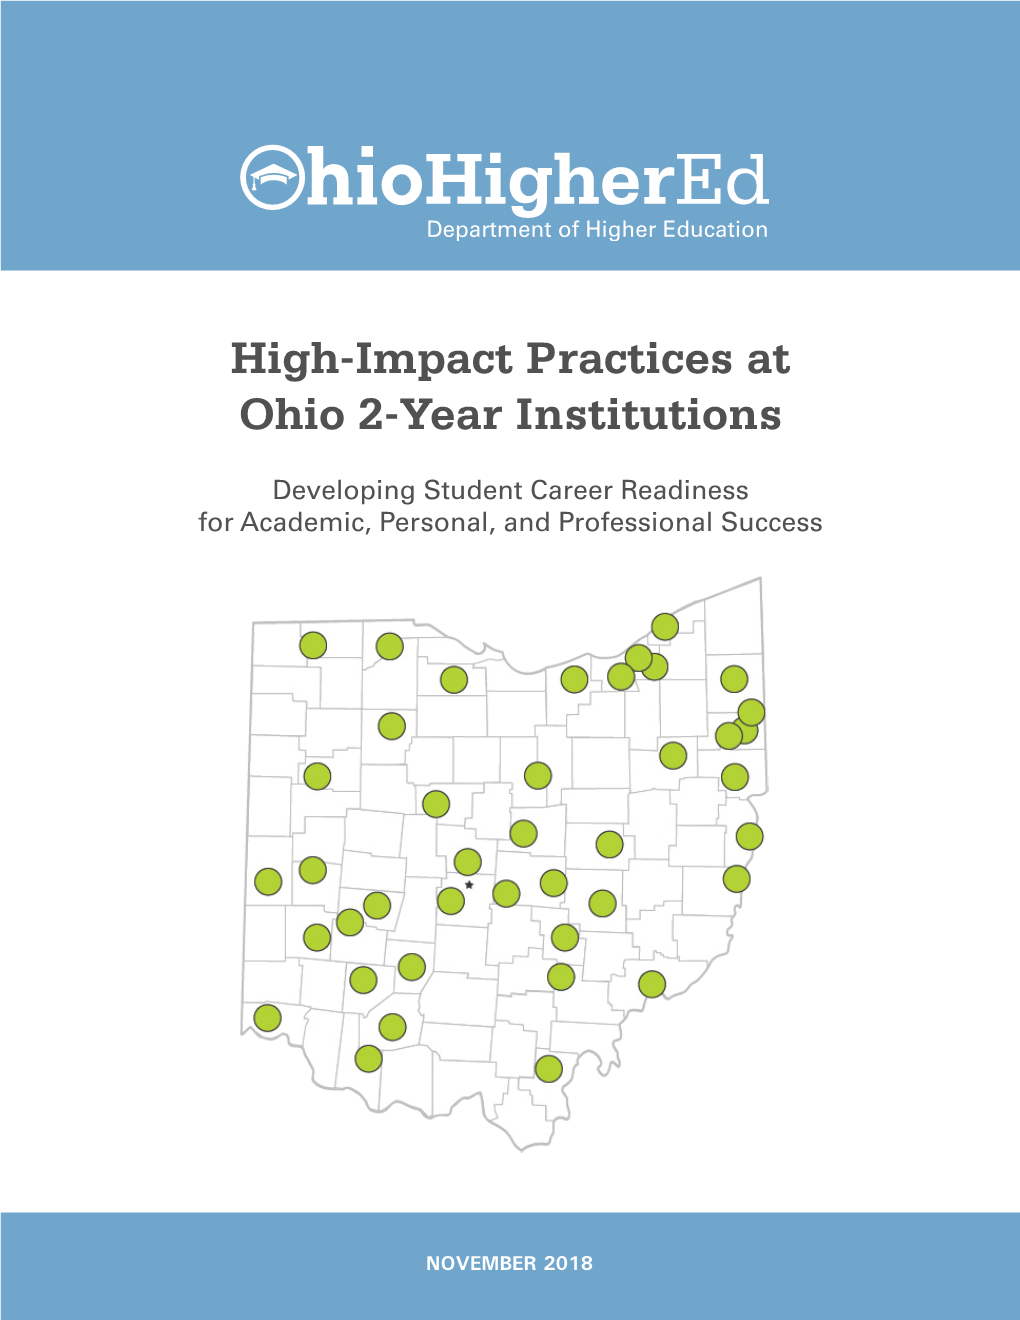 High-Impact Practices at Ohio 2-Year Institutions